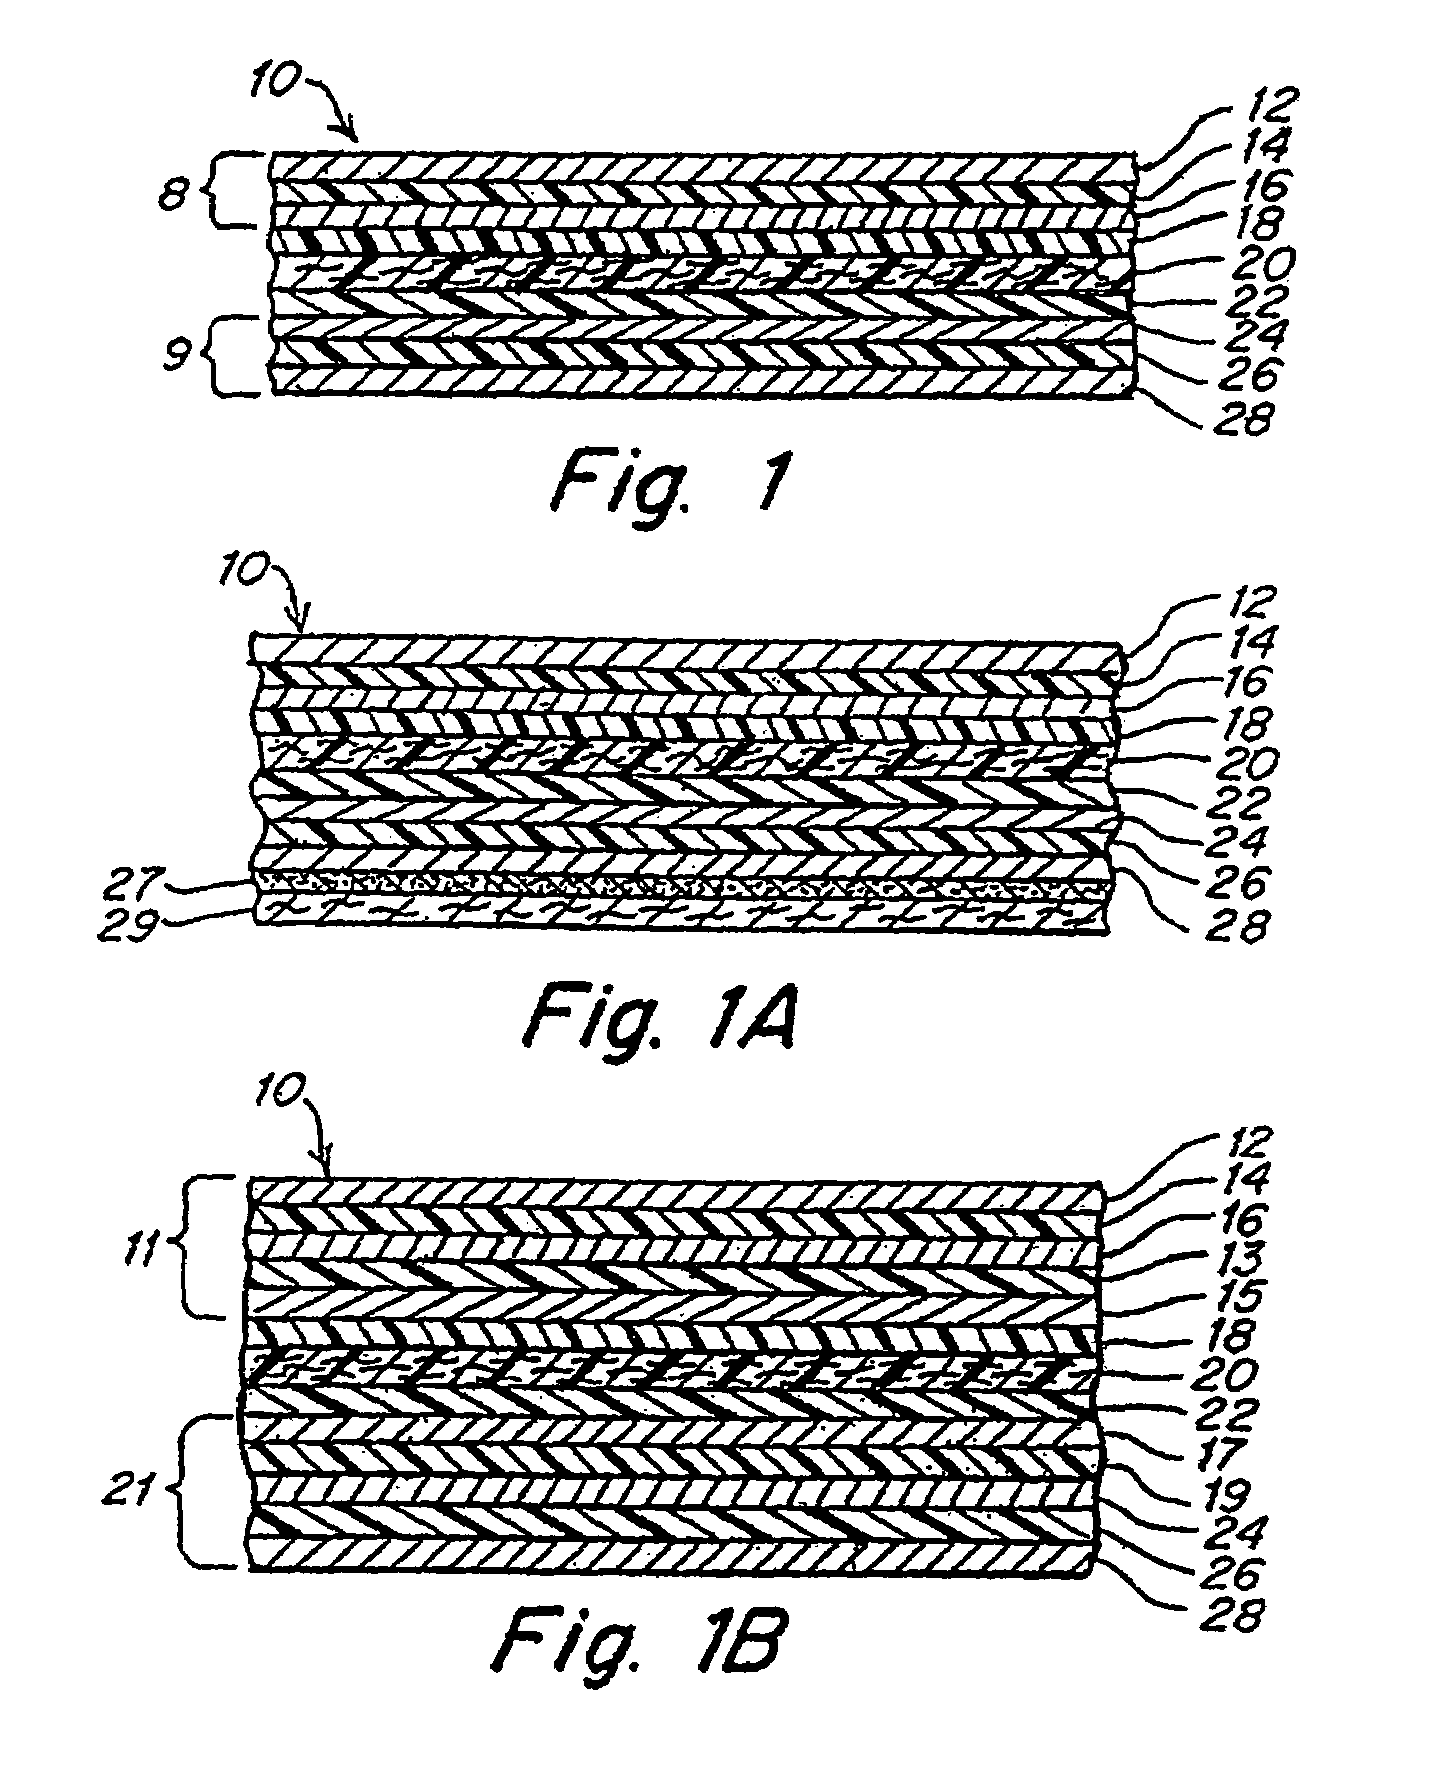 Facing having increased stiffness for insulation and other applications